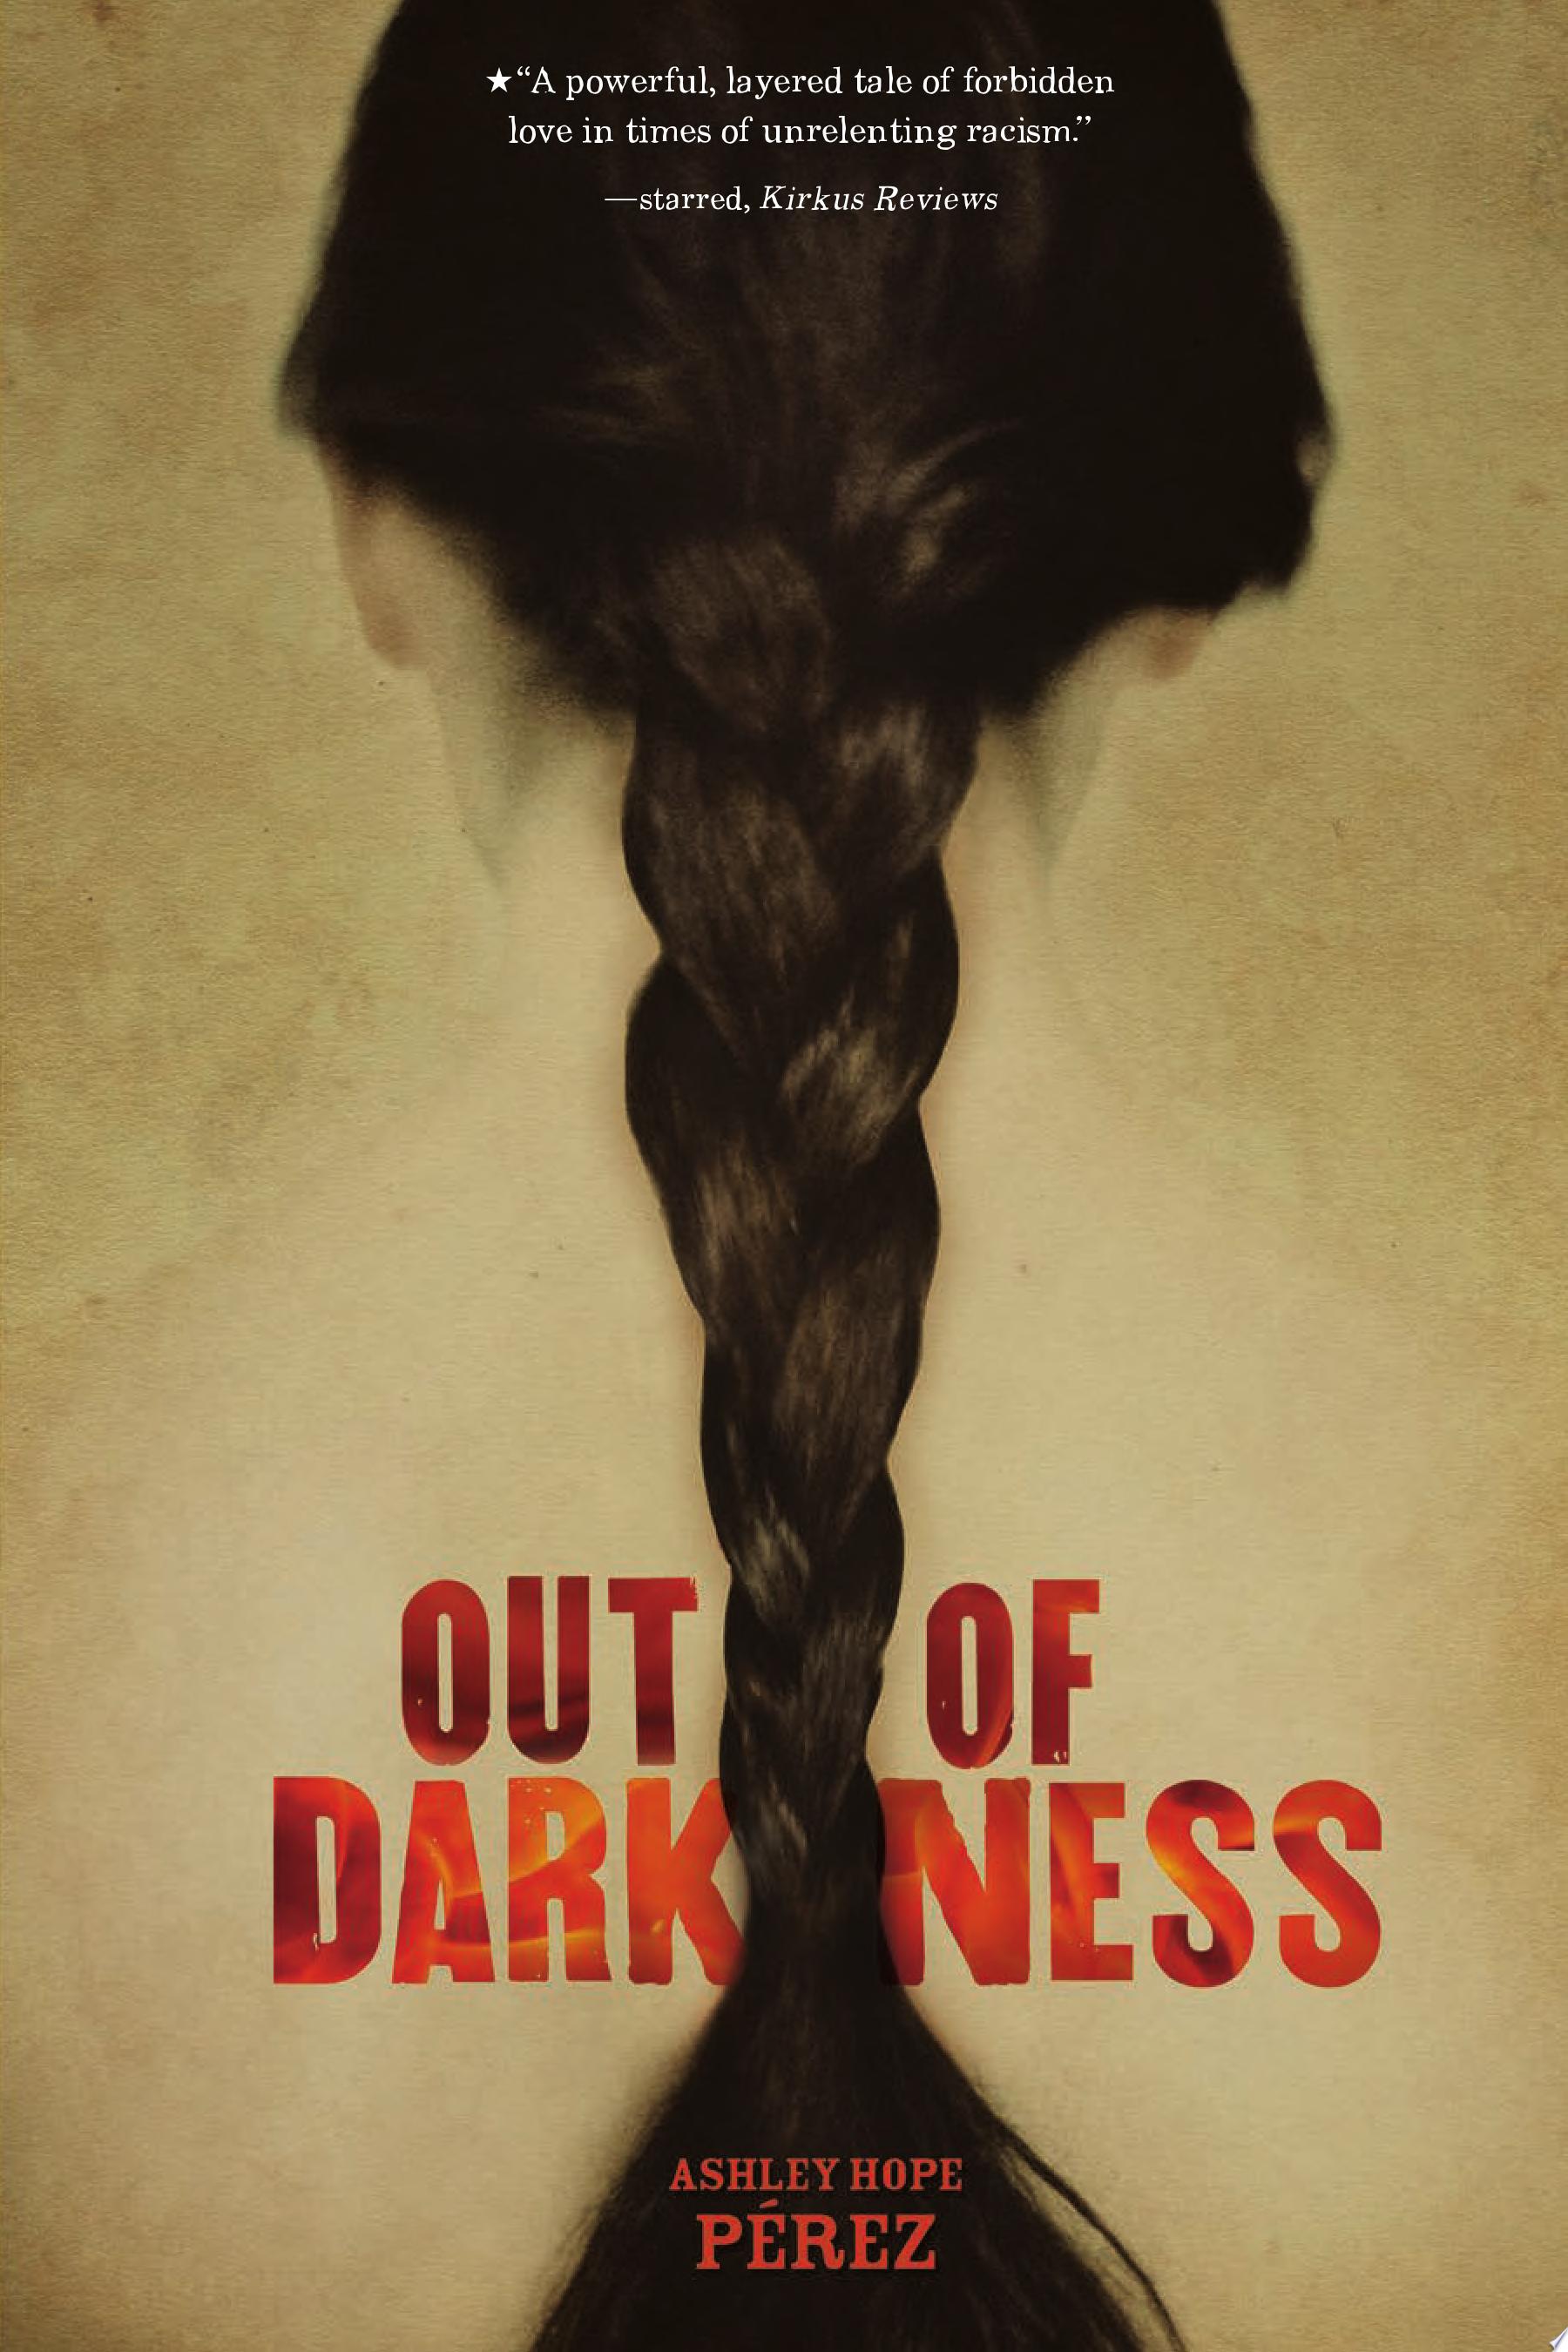 Image for "Out of Darkness"